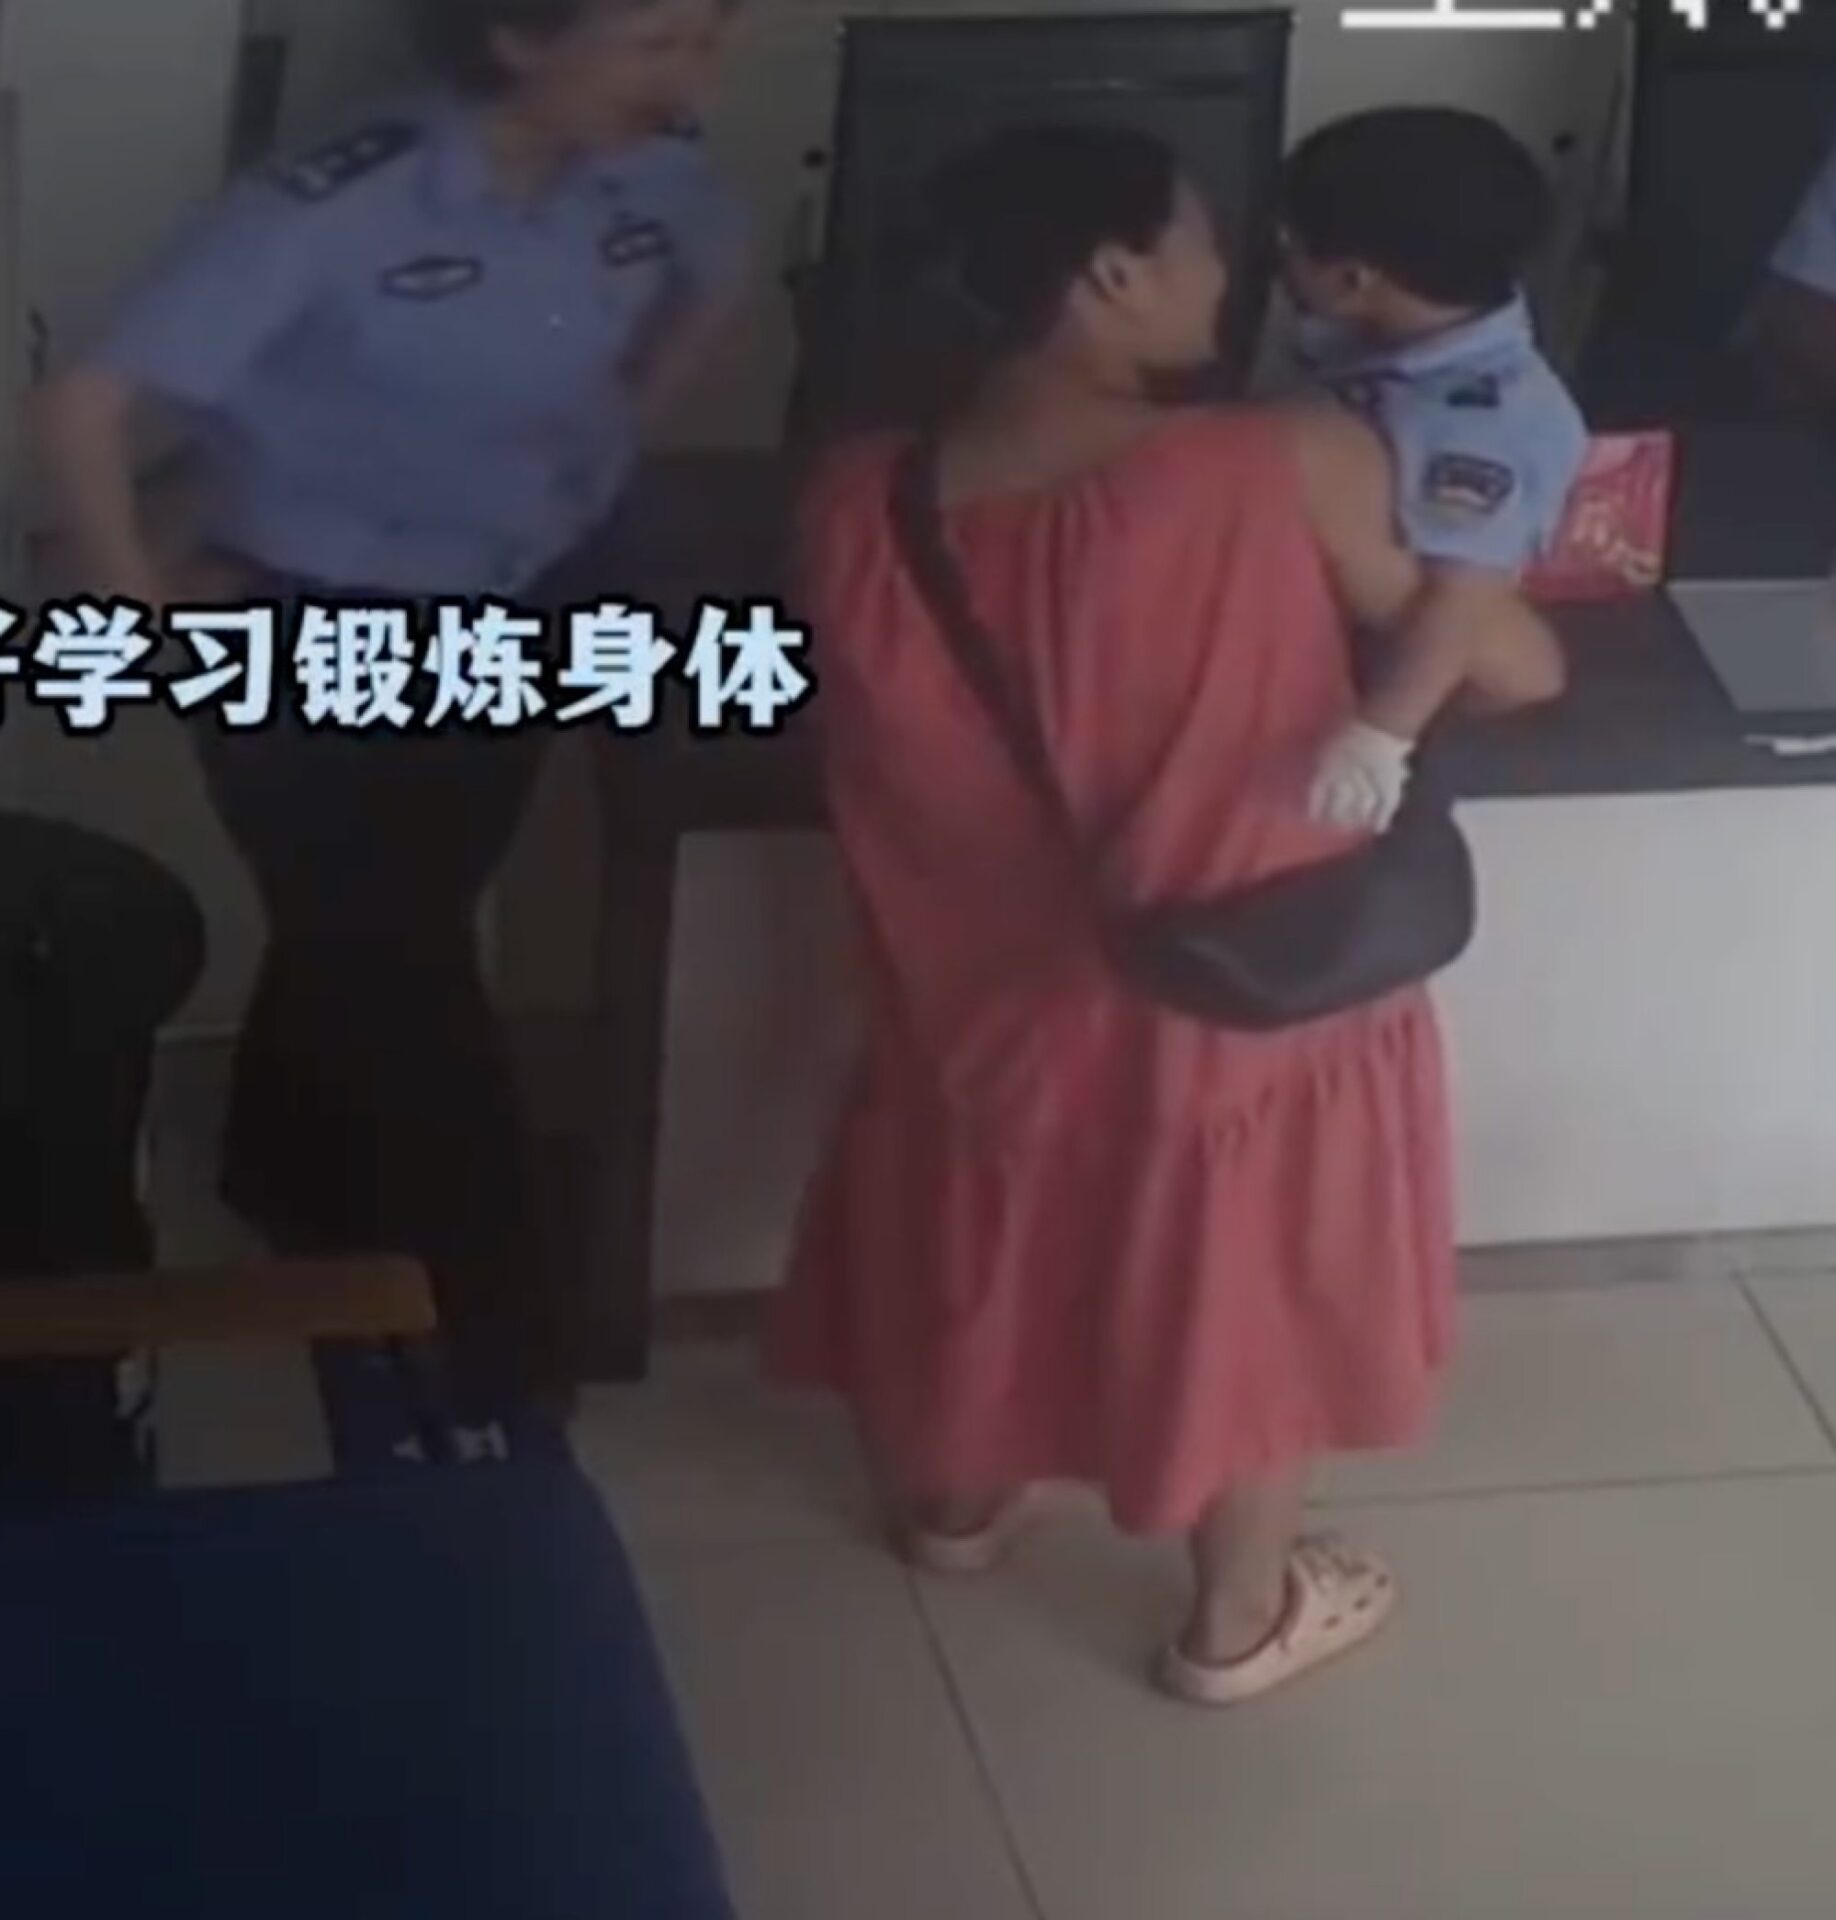 A female police officer at the station helped the mother explain a few things to her daughter and convinced her to take off the costume. Photo: Weibo